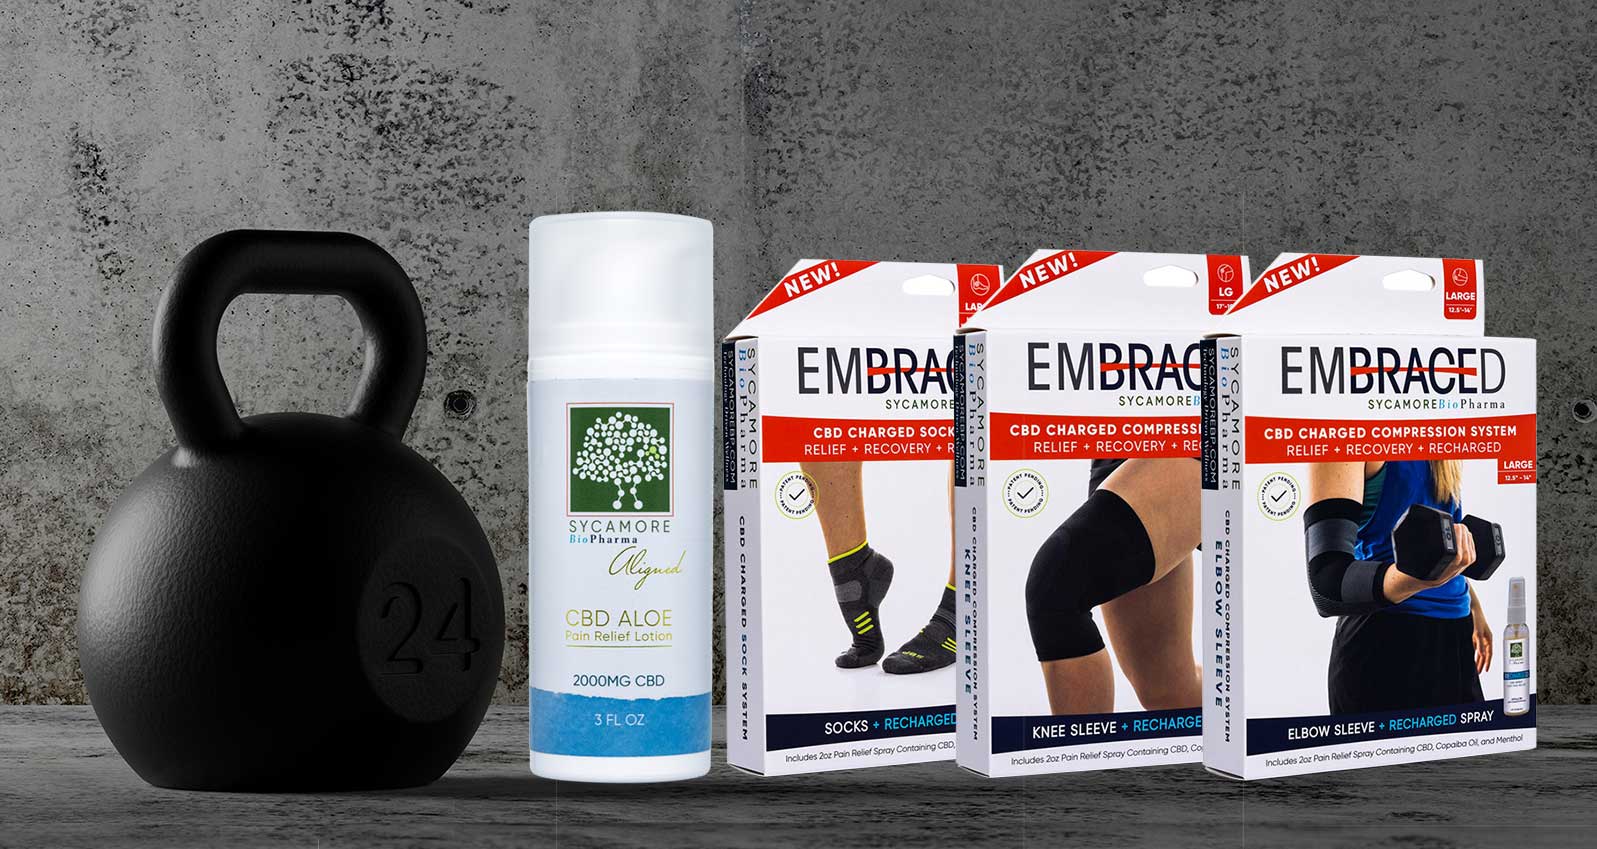 CBD-infused products including XBD-infused lotion and compression sleeves for pain relief.